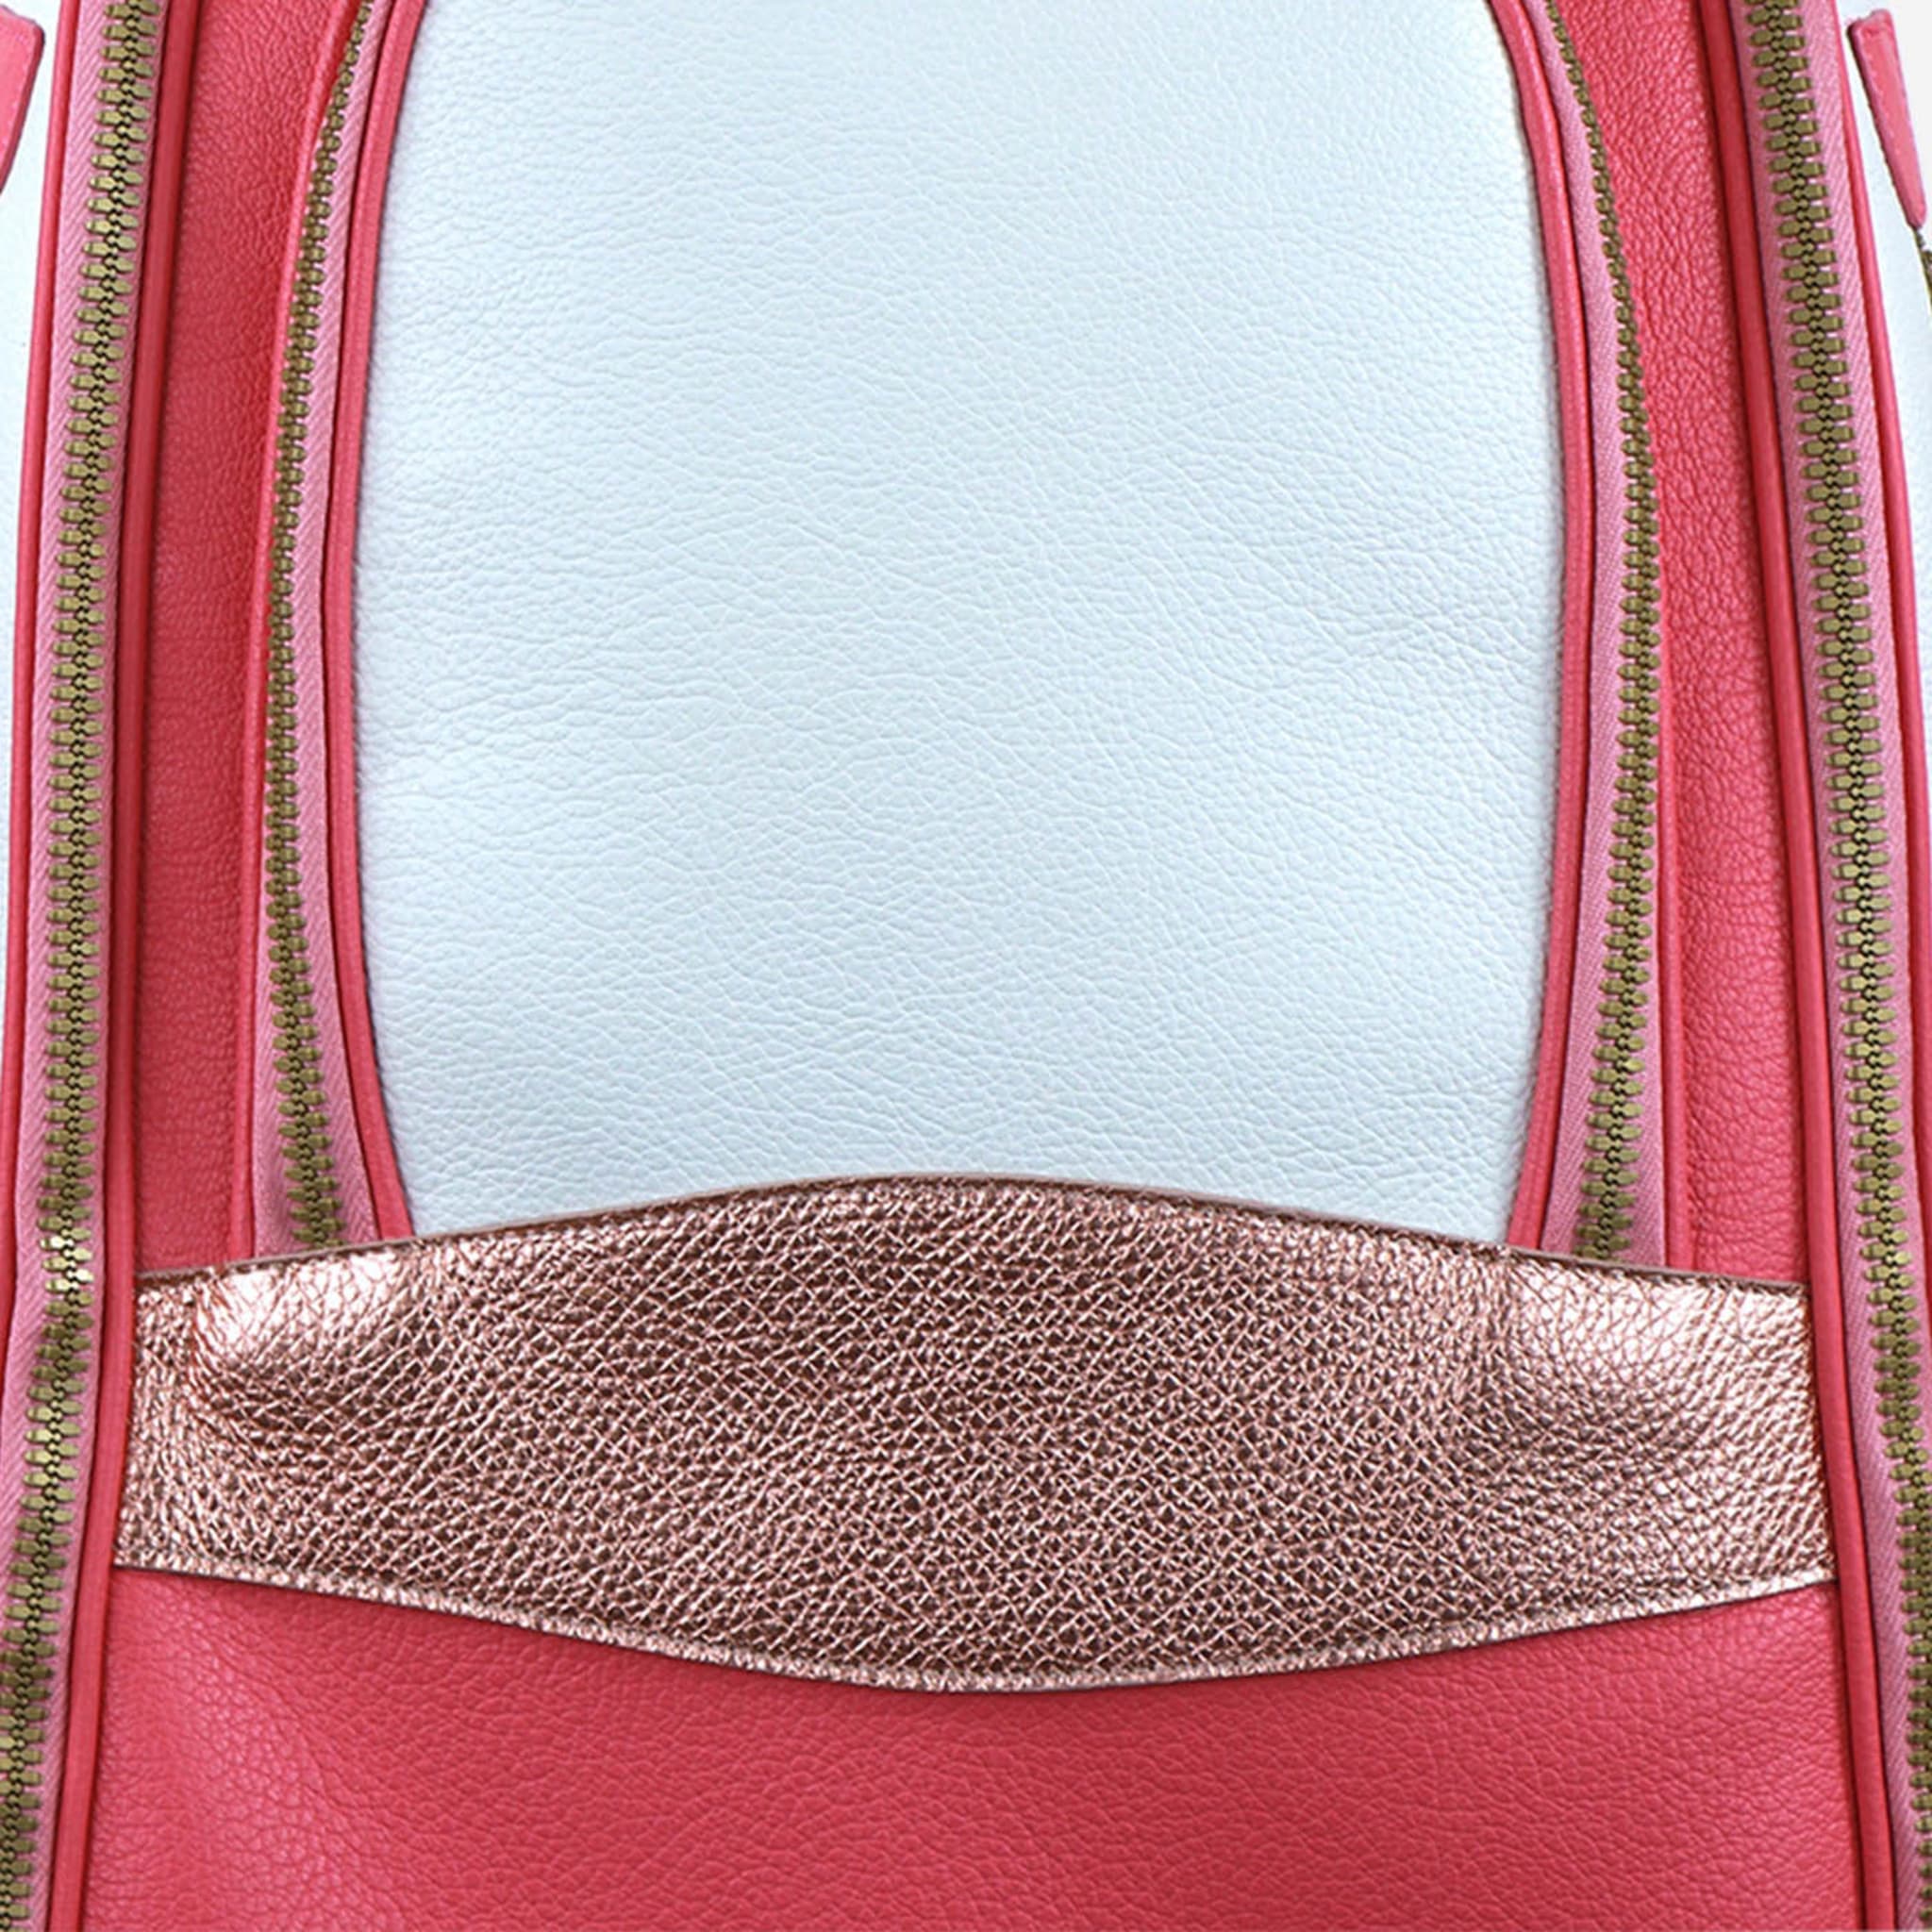 Imperiale Pink & White Leather Golf Bag - Alternative view 4